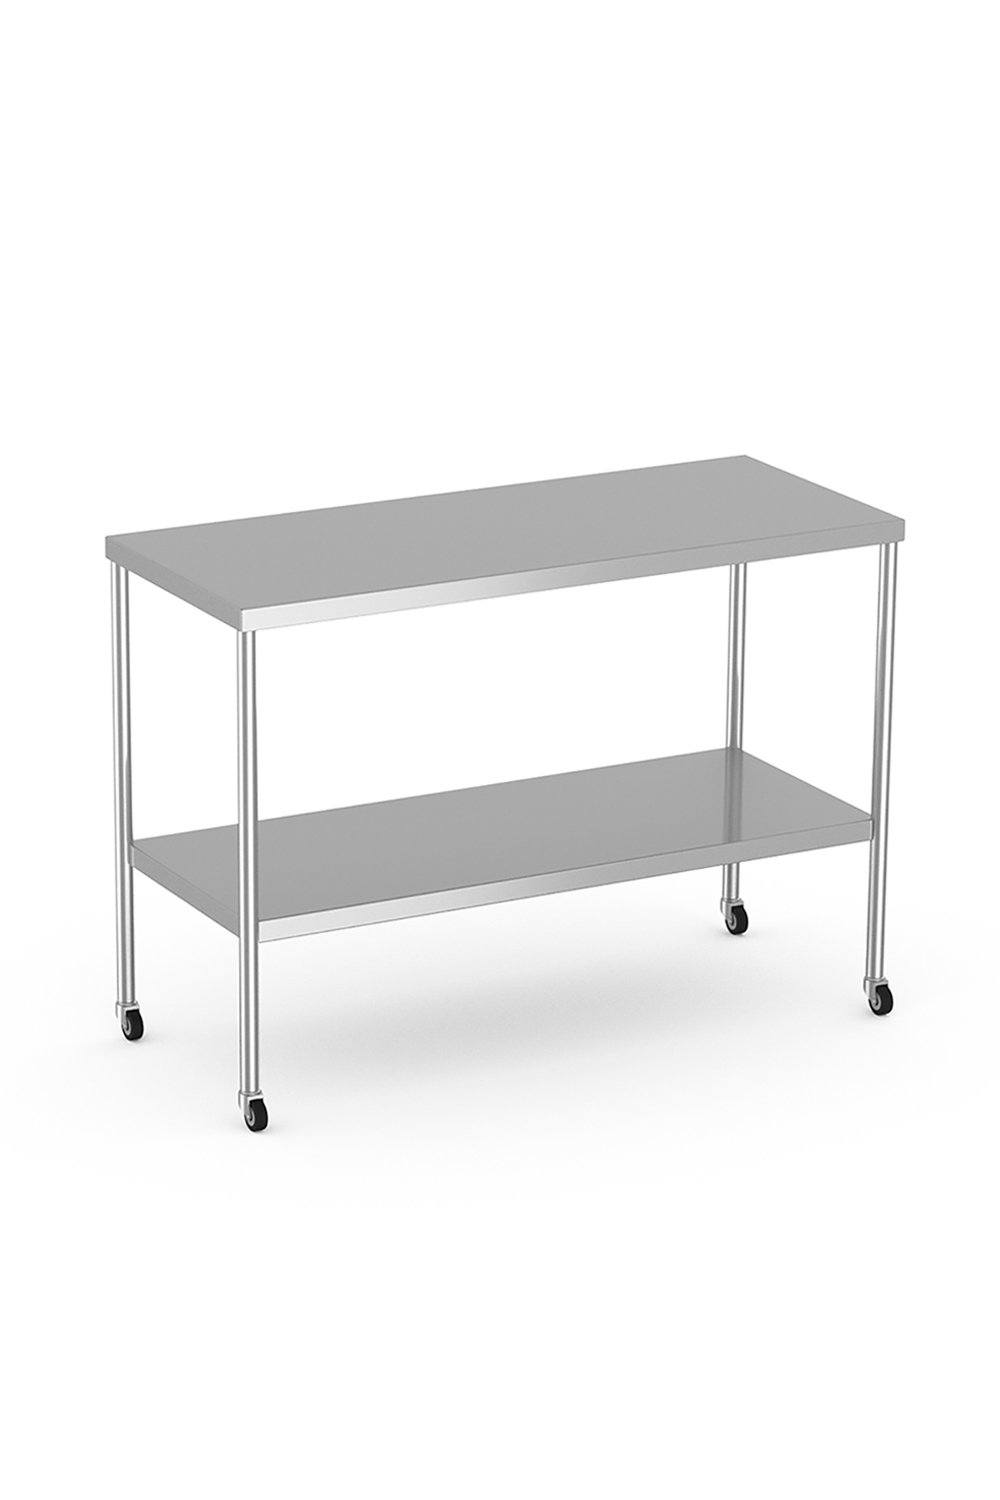 Stainless Steel Table Stainless Solutions Macmedical 20"D x 48"W x 34"H Under-shelf 